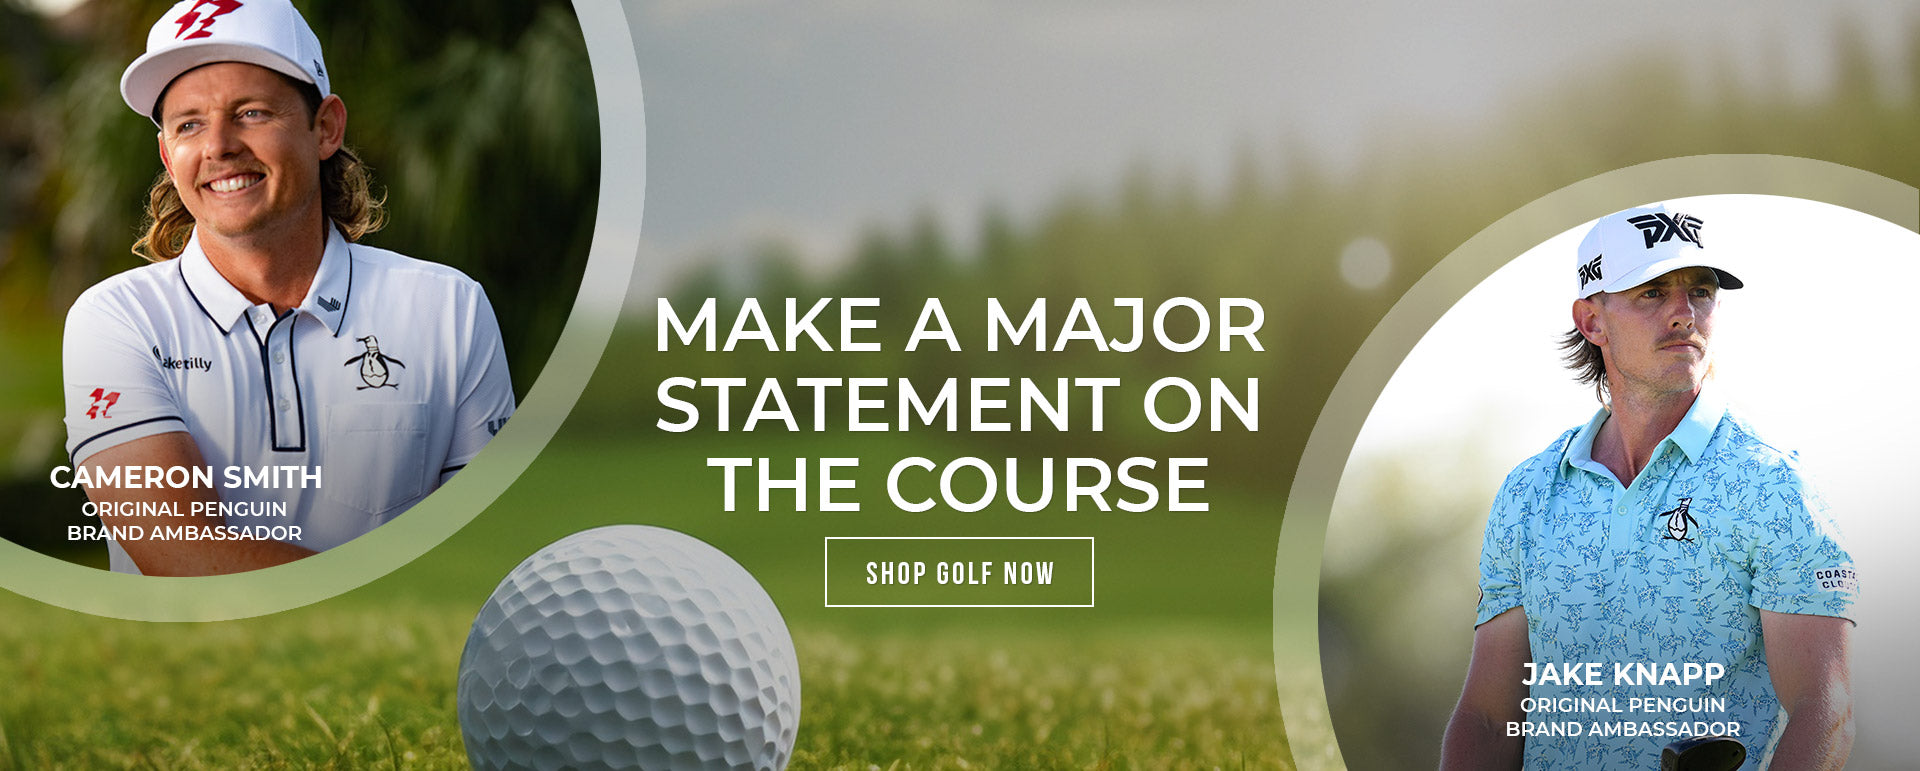 MAKE A MAJOR STATEMENT ON THE COURSE | Shop Golf Now